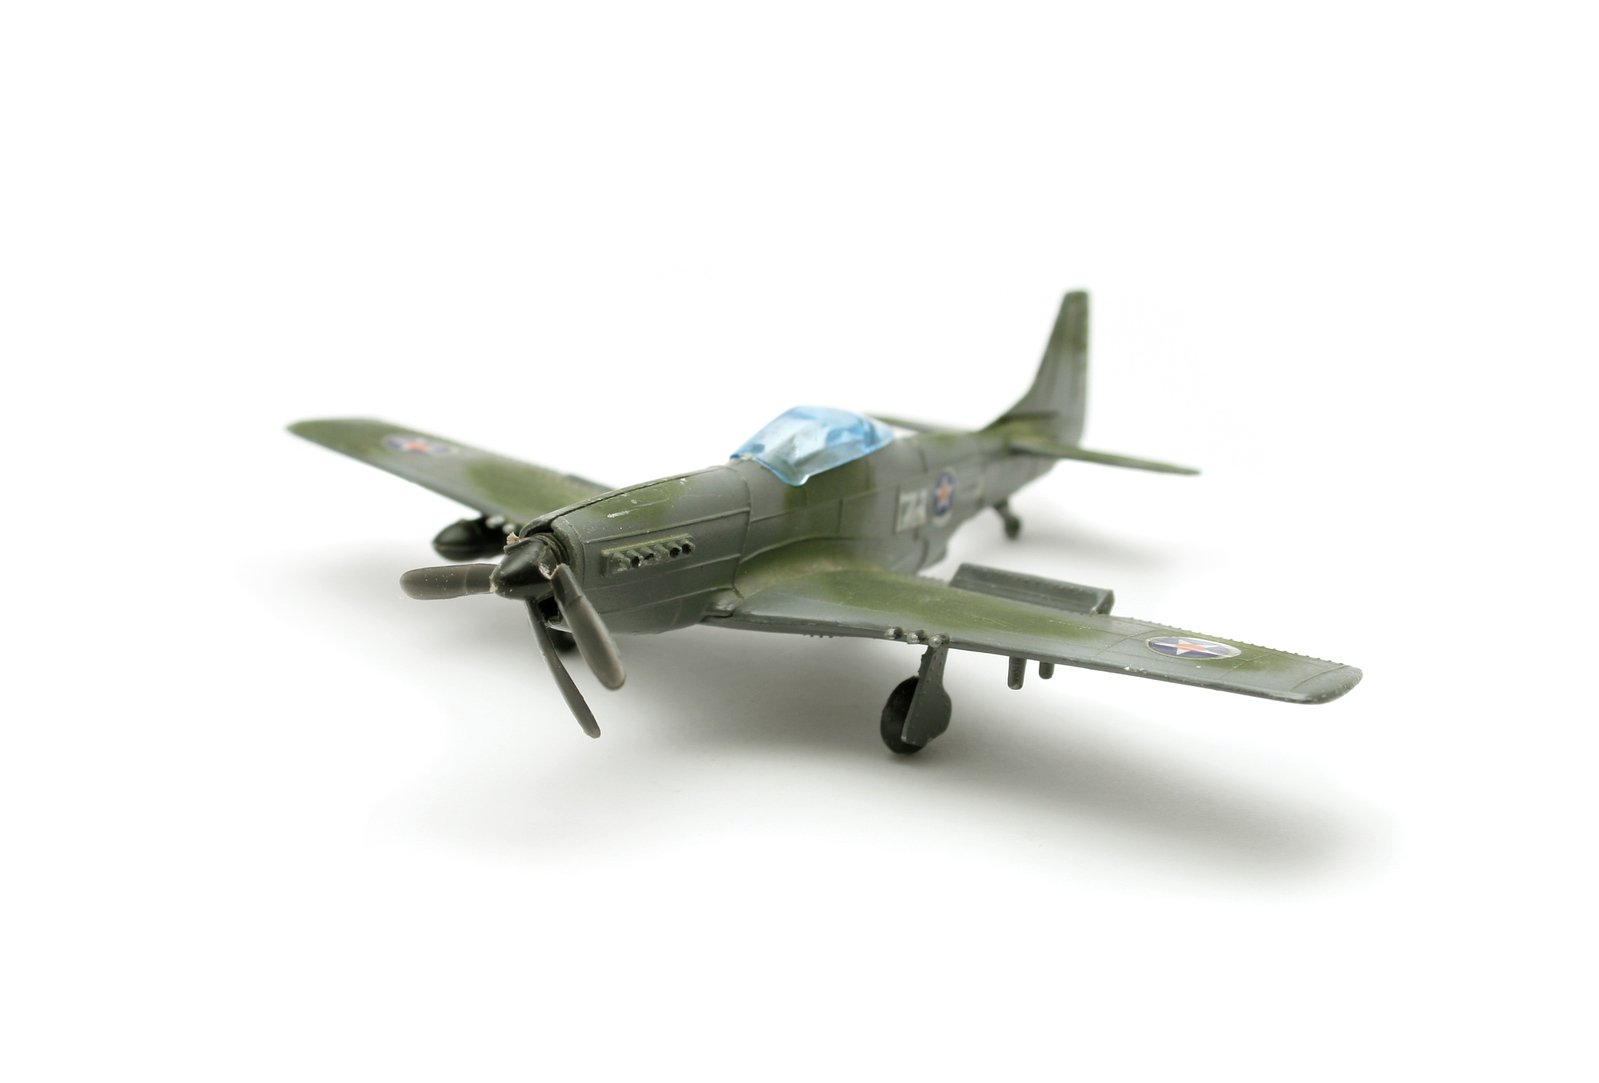 a green toy model airplane on a white surface